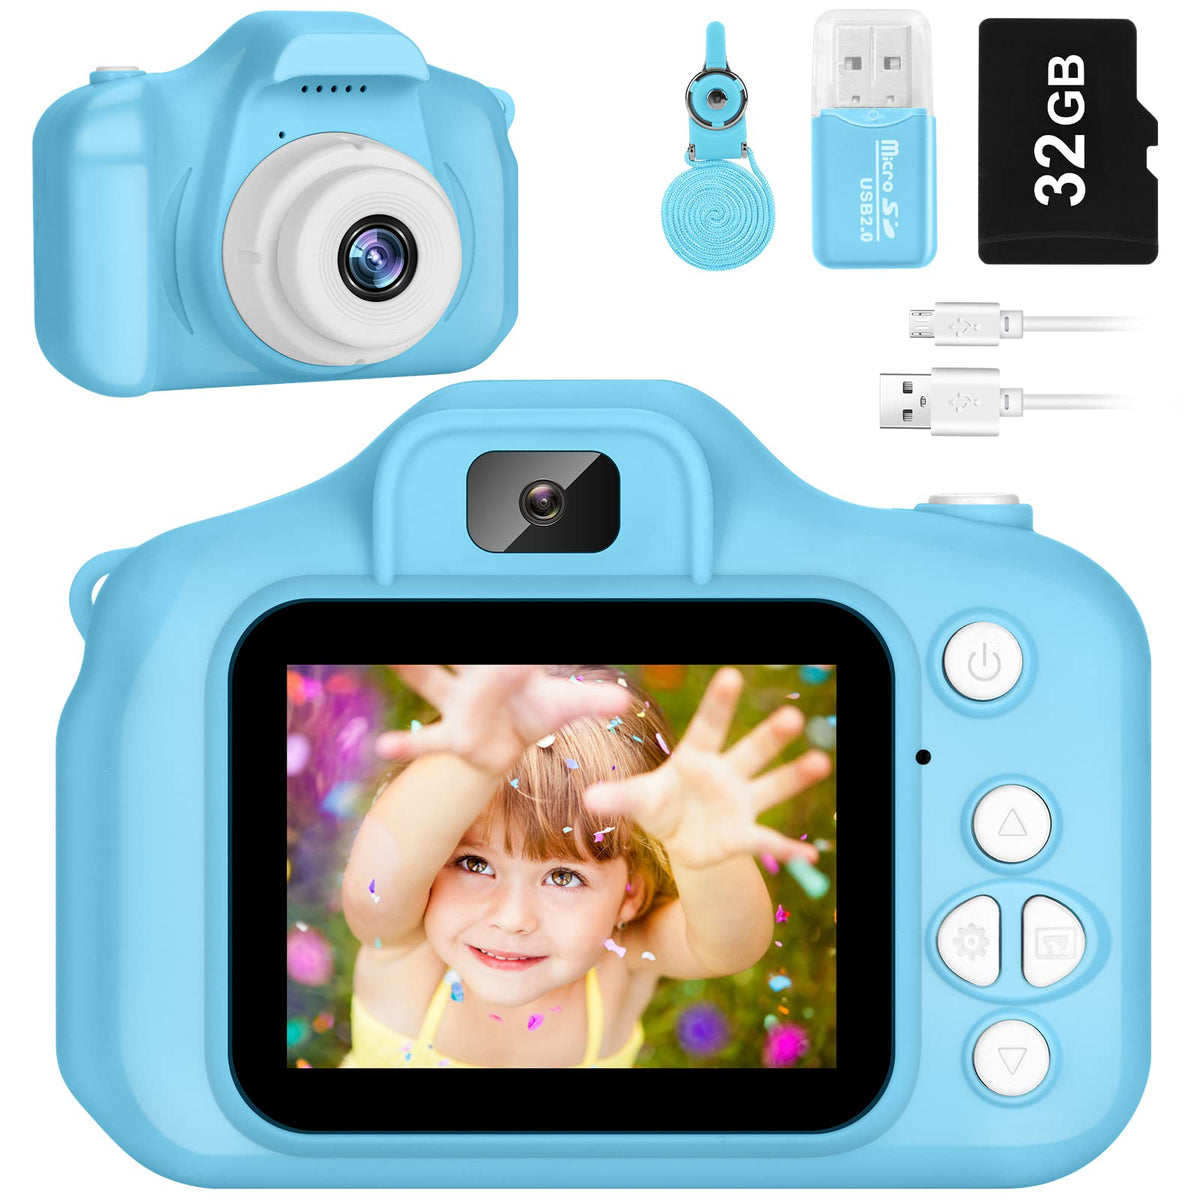 Kids Camera for Boys and Girls, SINEAU Digital Camera for Kids Toy Gift, Toddler Camera Birthday Gift for Age 3 4 5 6 7 8 9 10 with 32GB SD Card, Video Recorder 1080P IPS 2 Inch(Blue)